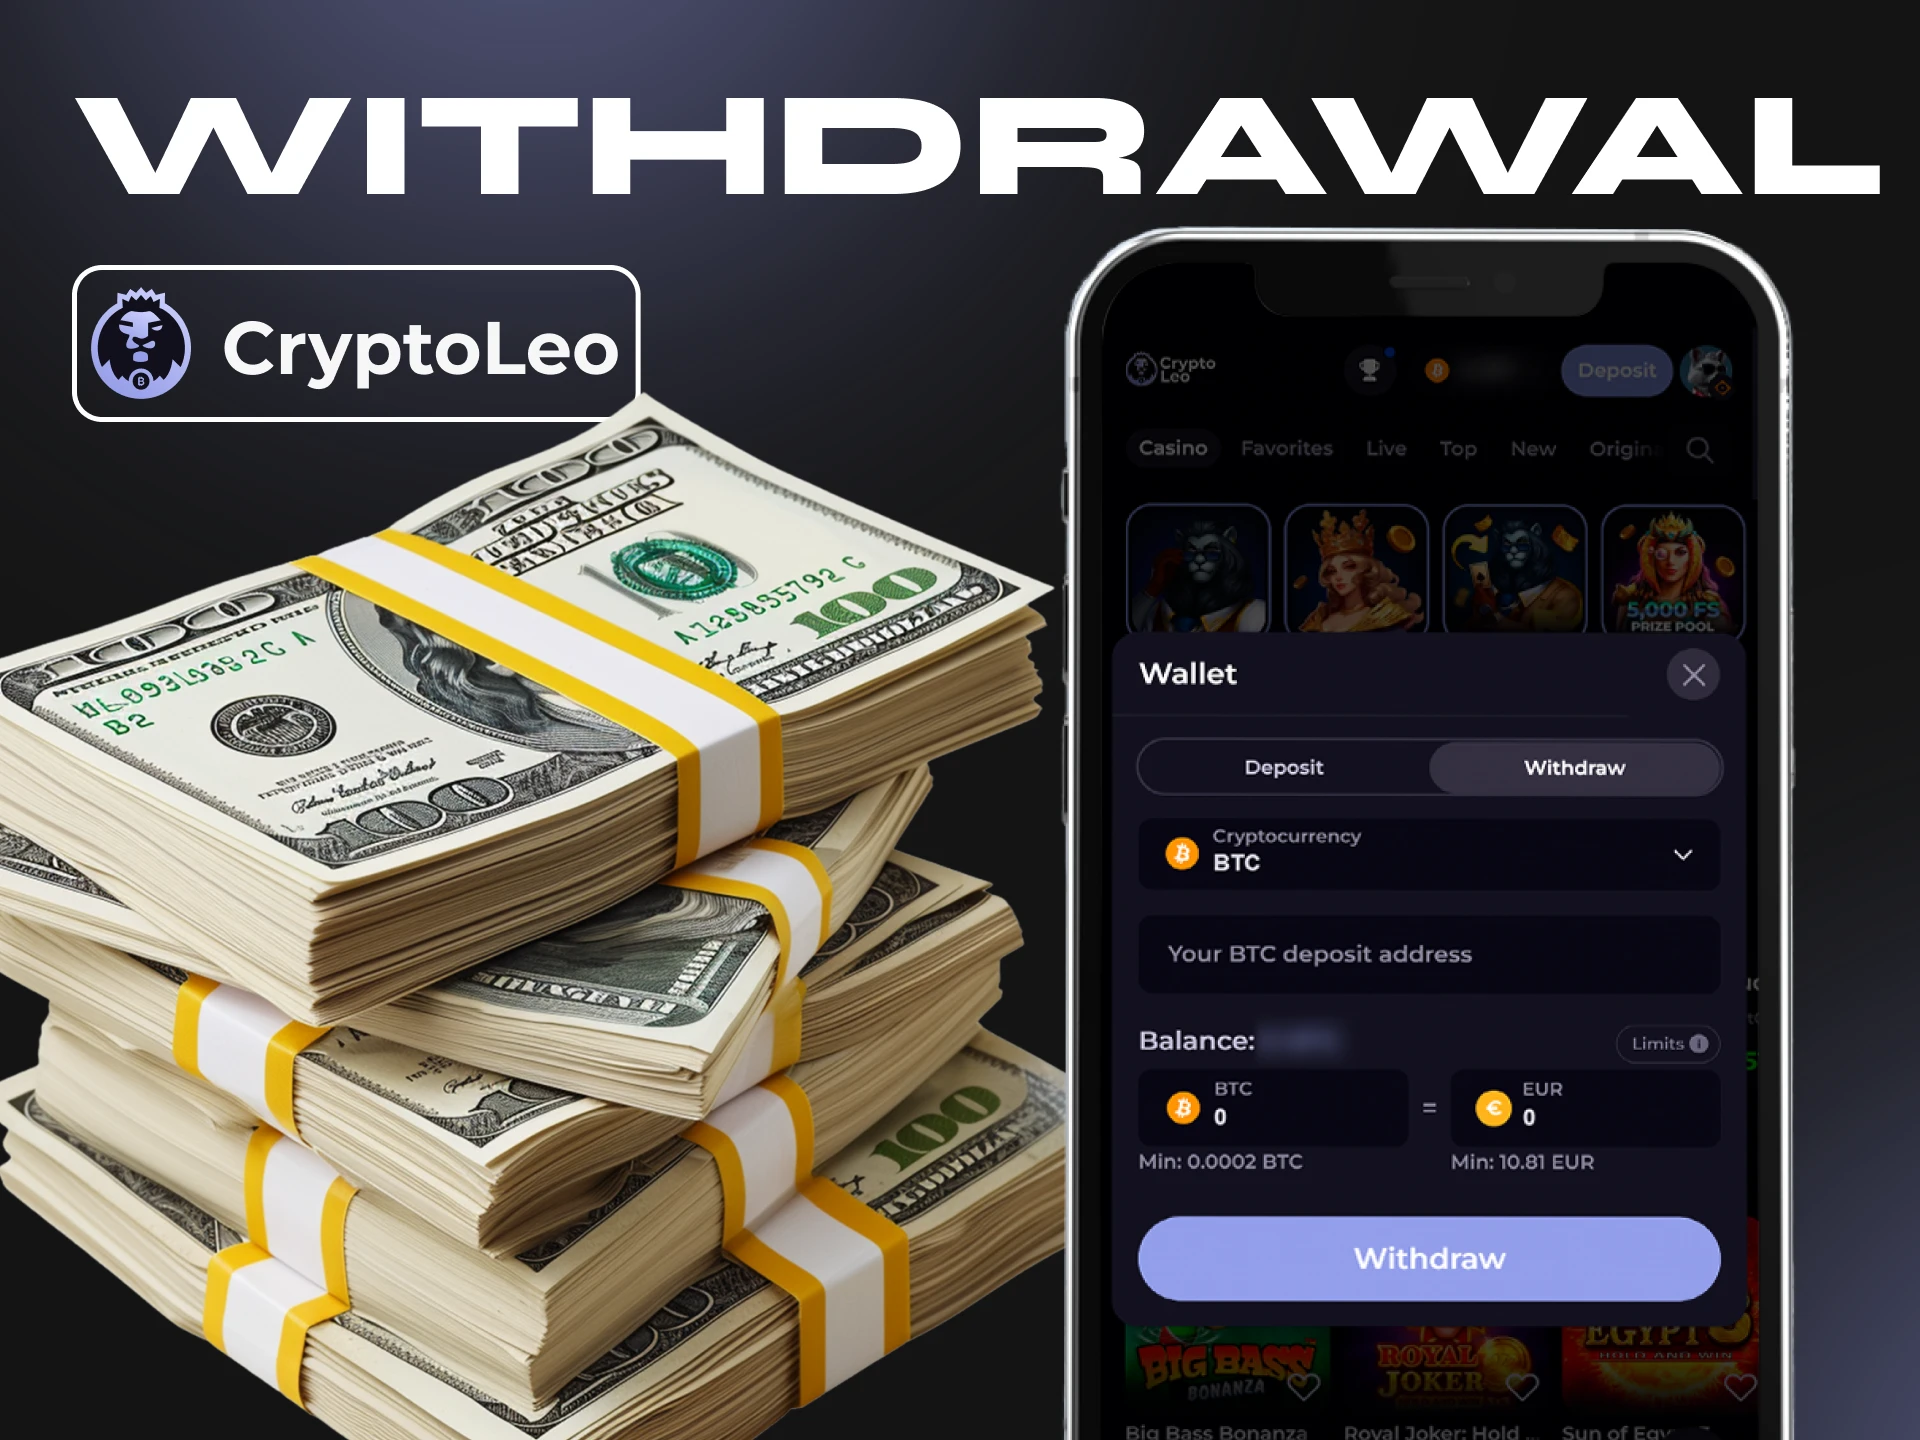 You can withdraw winnings from your Cryptoleo profile using your phone.